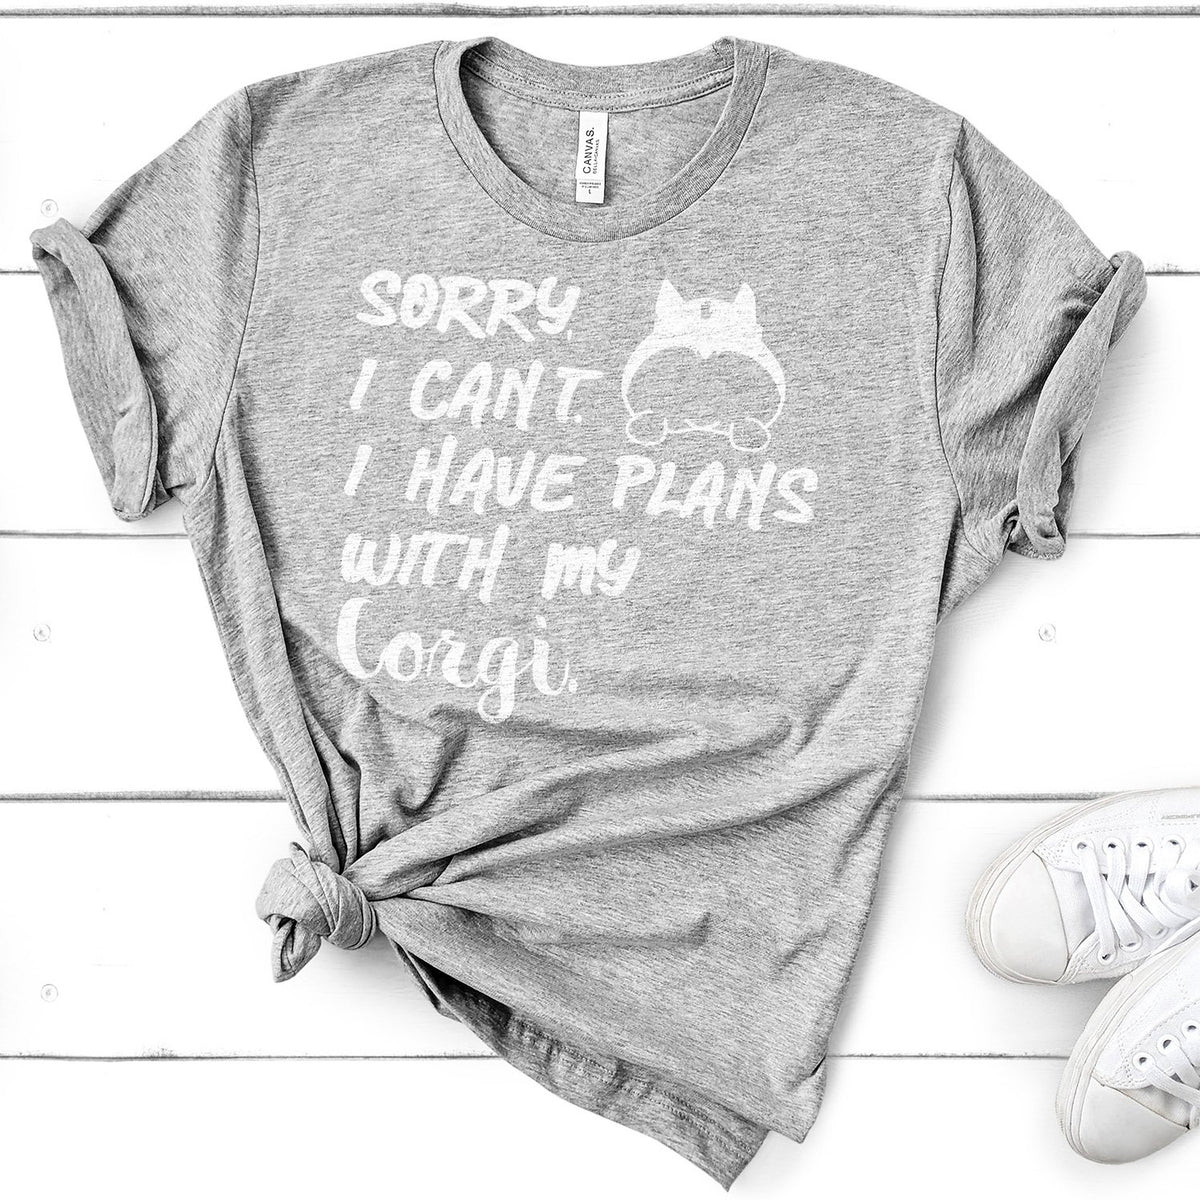 Sorry I Can&#39;t I Have Plans with My Corgi - Short Sleeve Tee Shirt